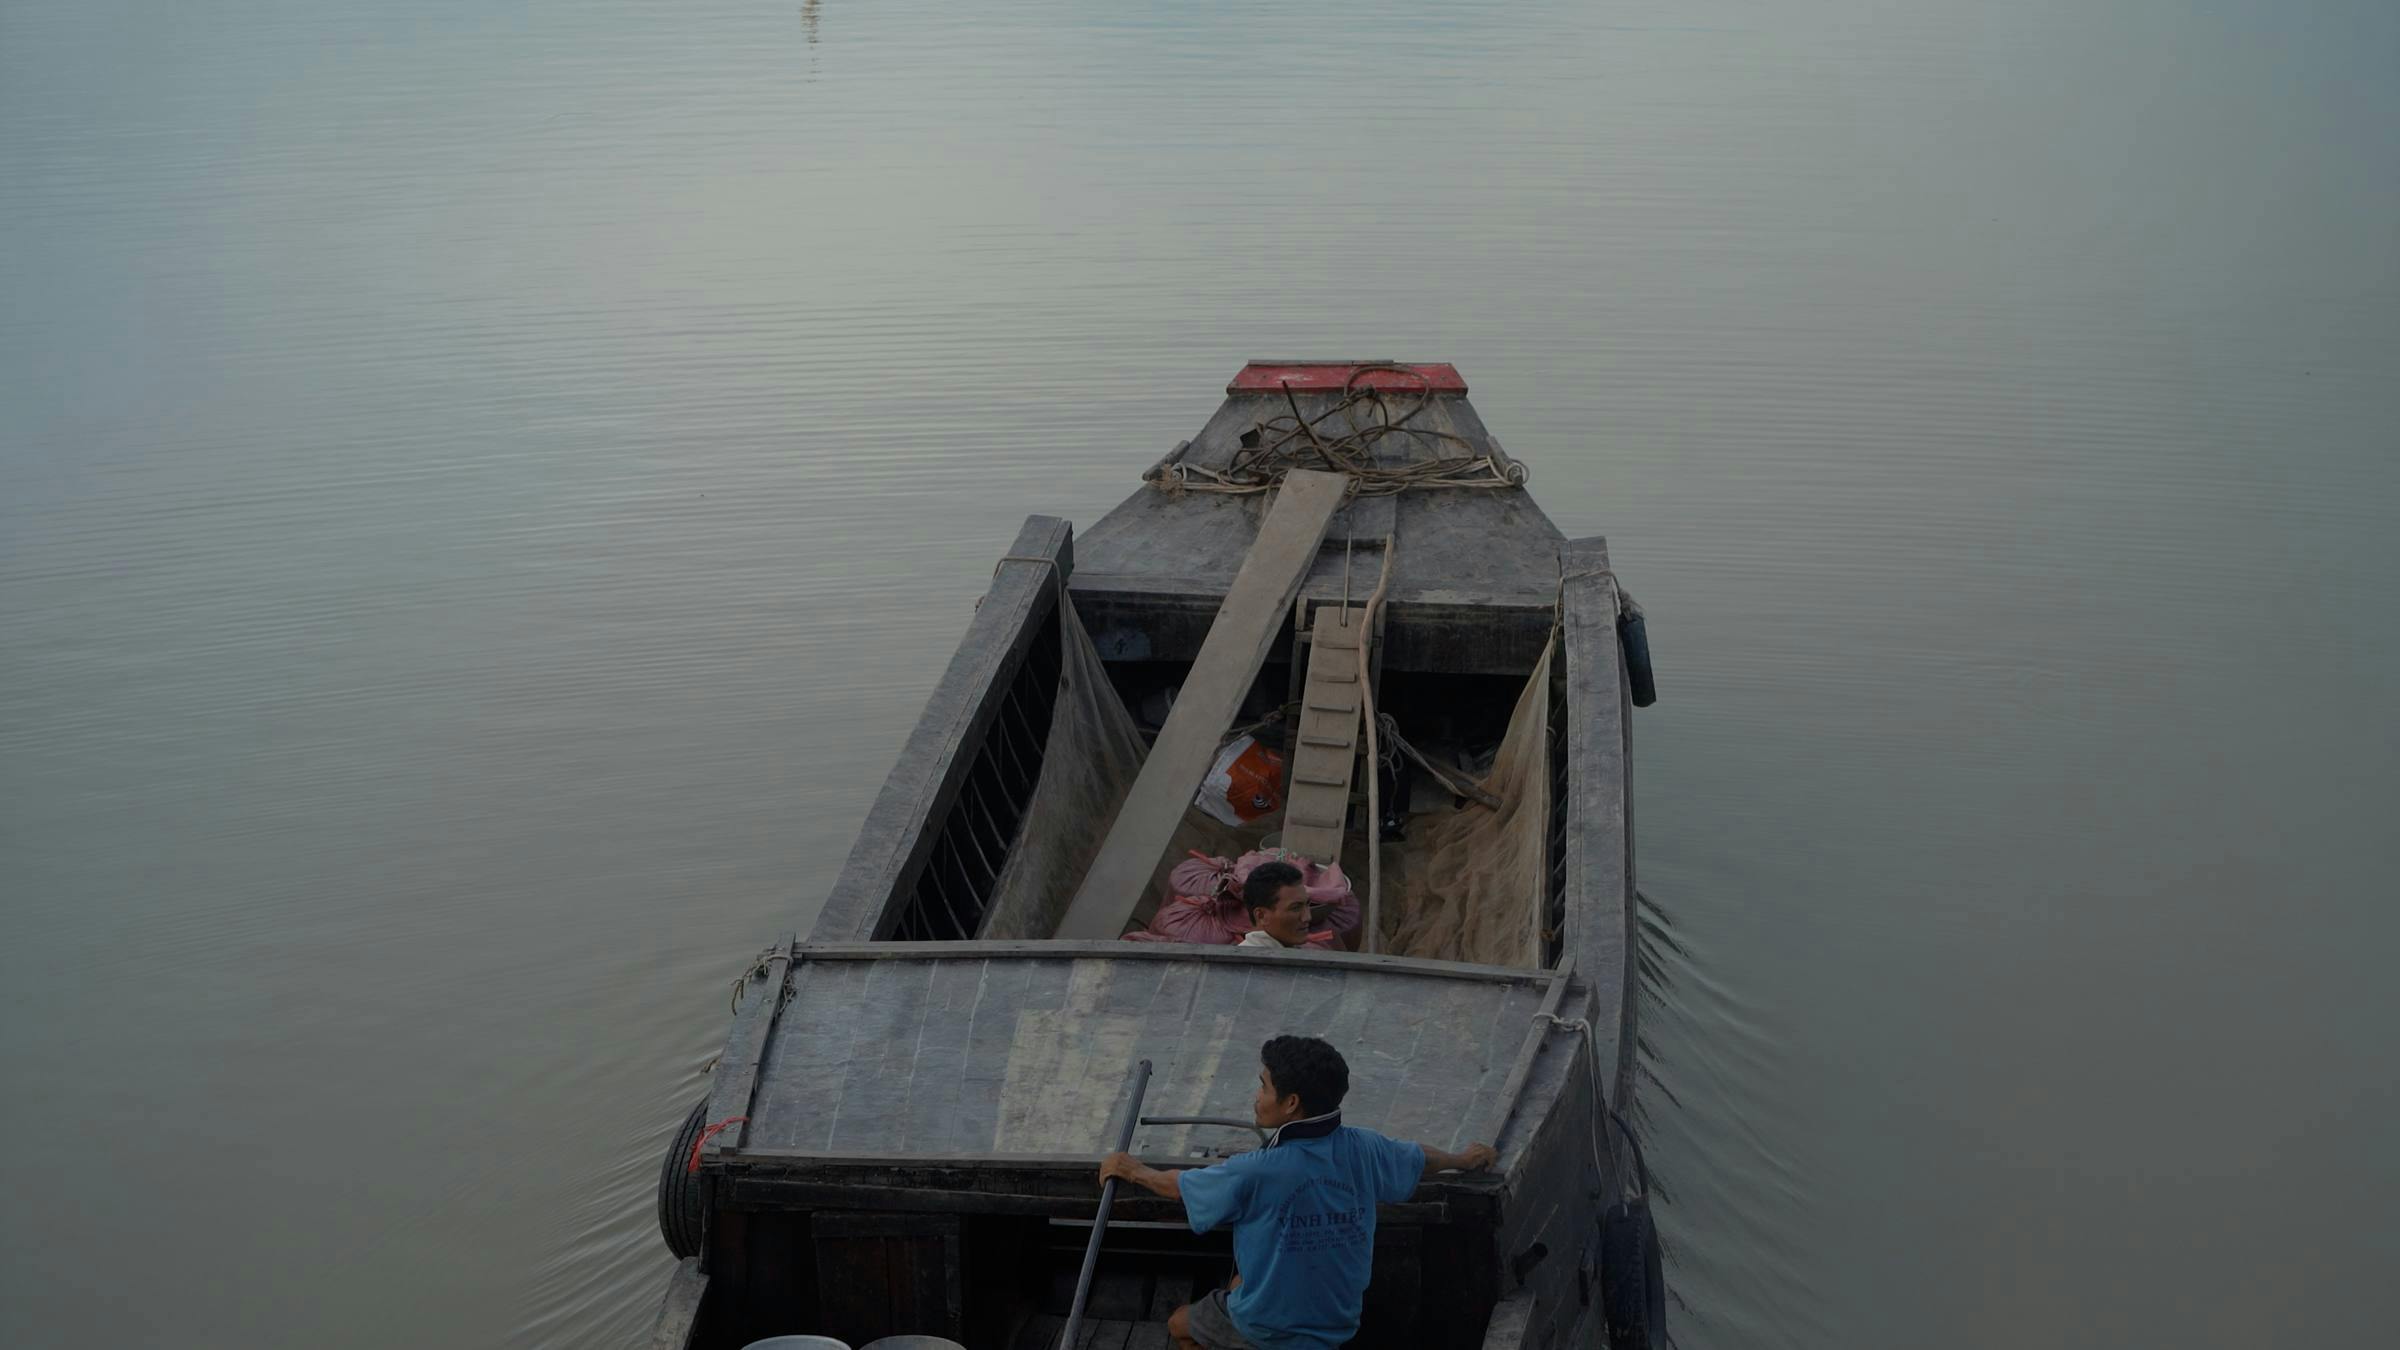 Image of an open top boat floating across grey water which has two people inside.